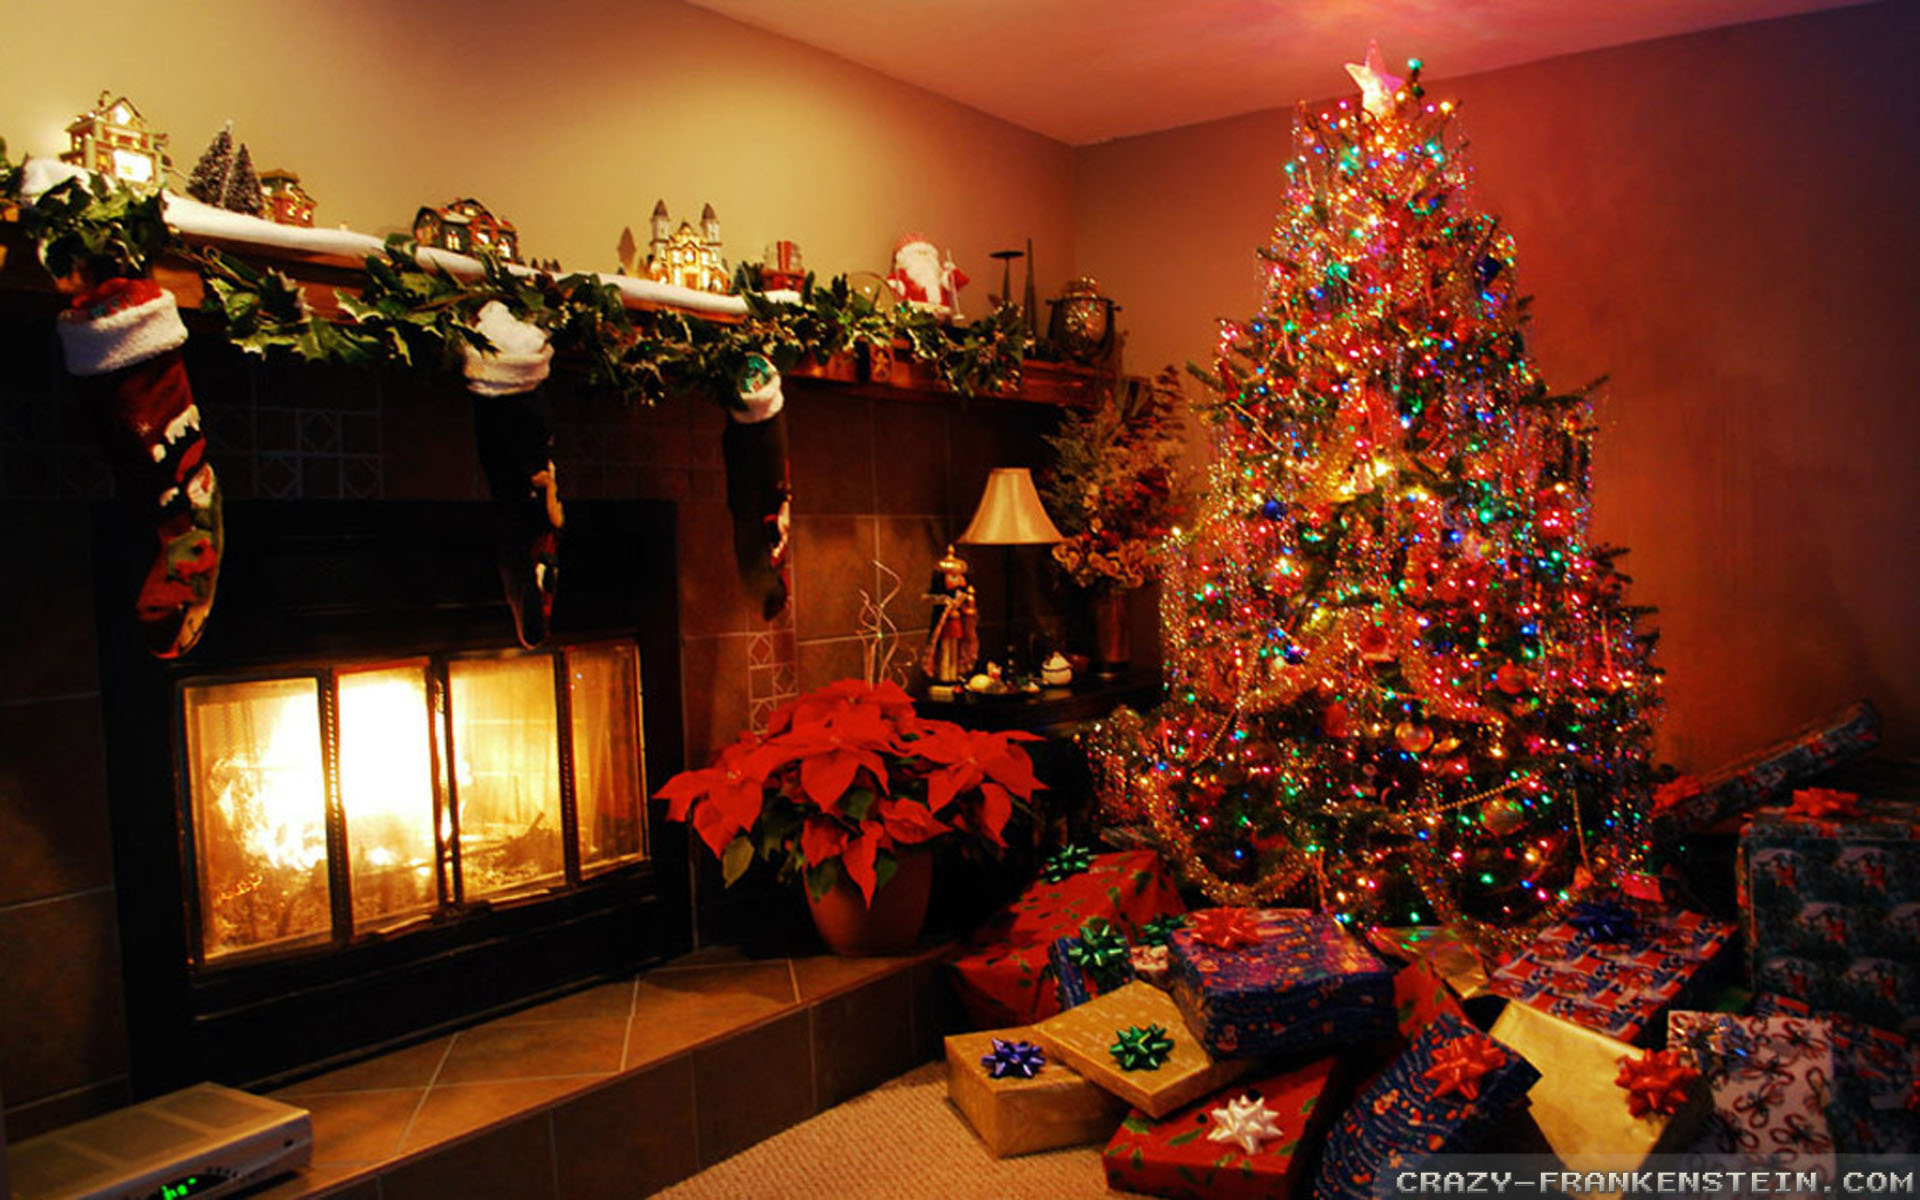 1920x1200px 38376 Kb Christmas Day 355771 - Christmas Day Living Room , HD Wallpaper & Backgrounds